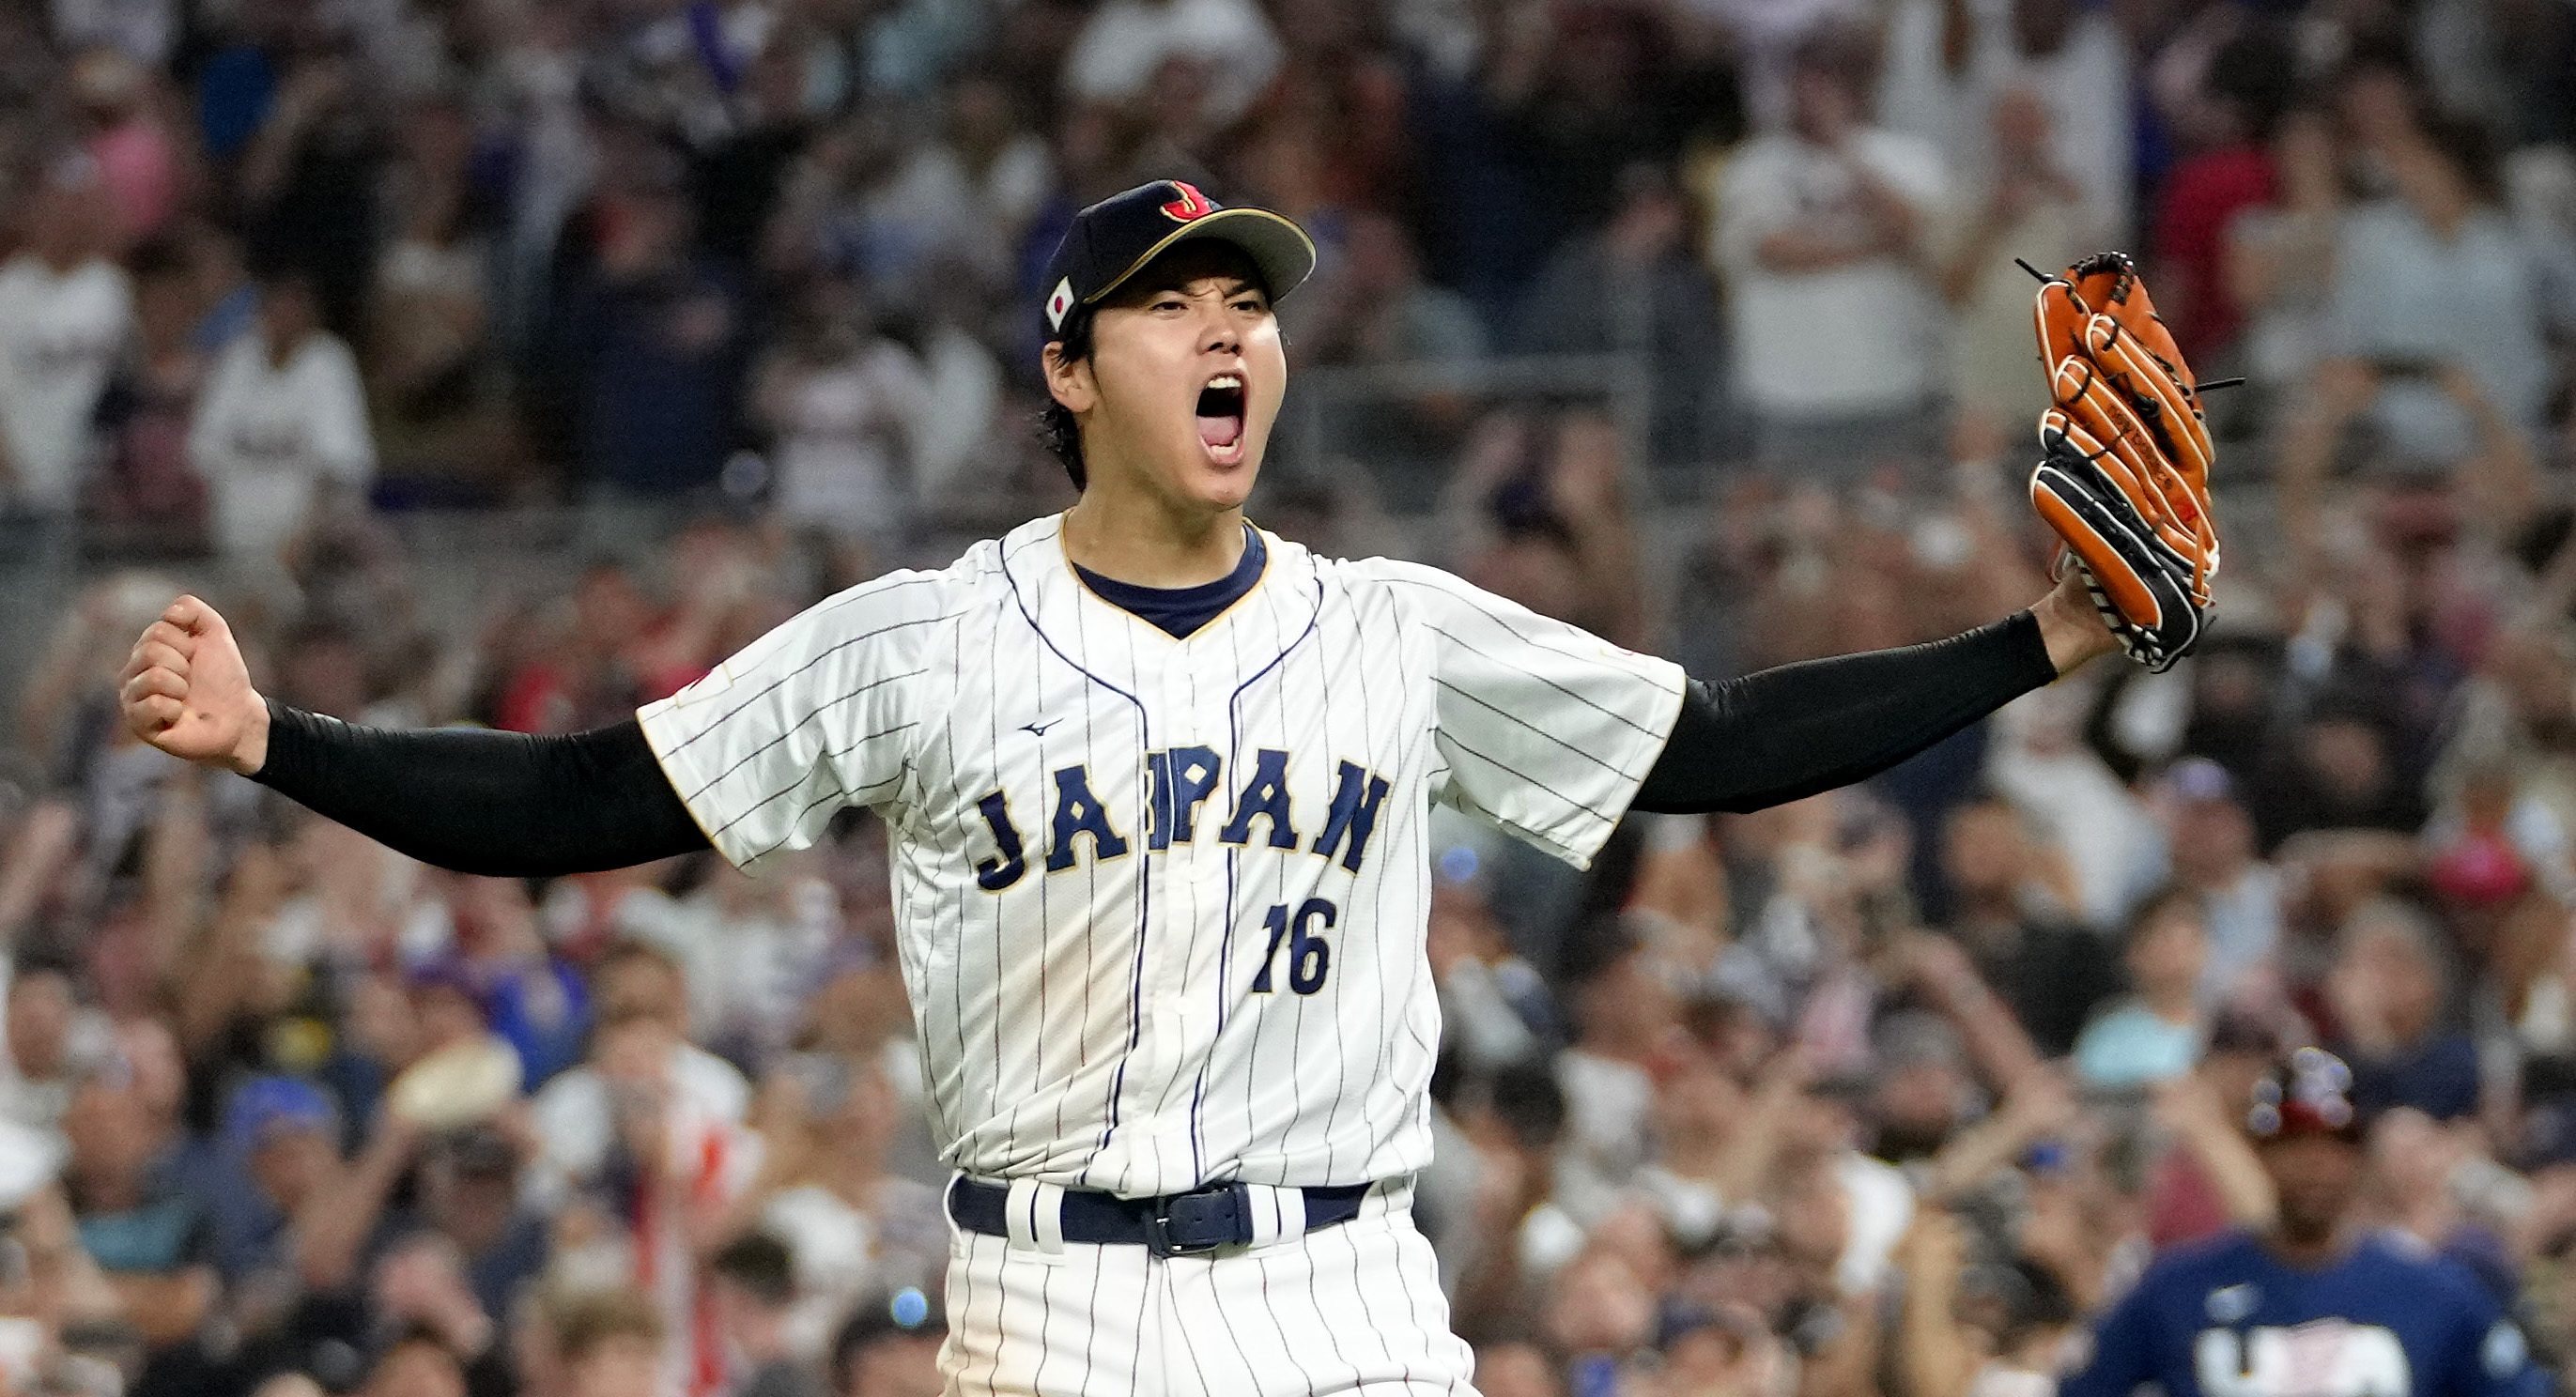 The All-Star Game is the Shohei Ohtani showcase America needs